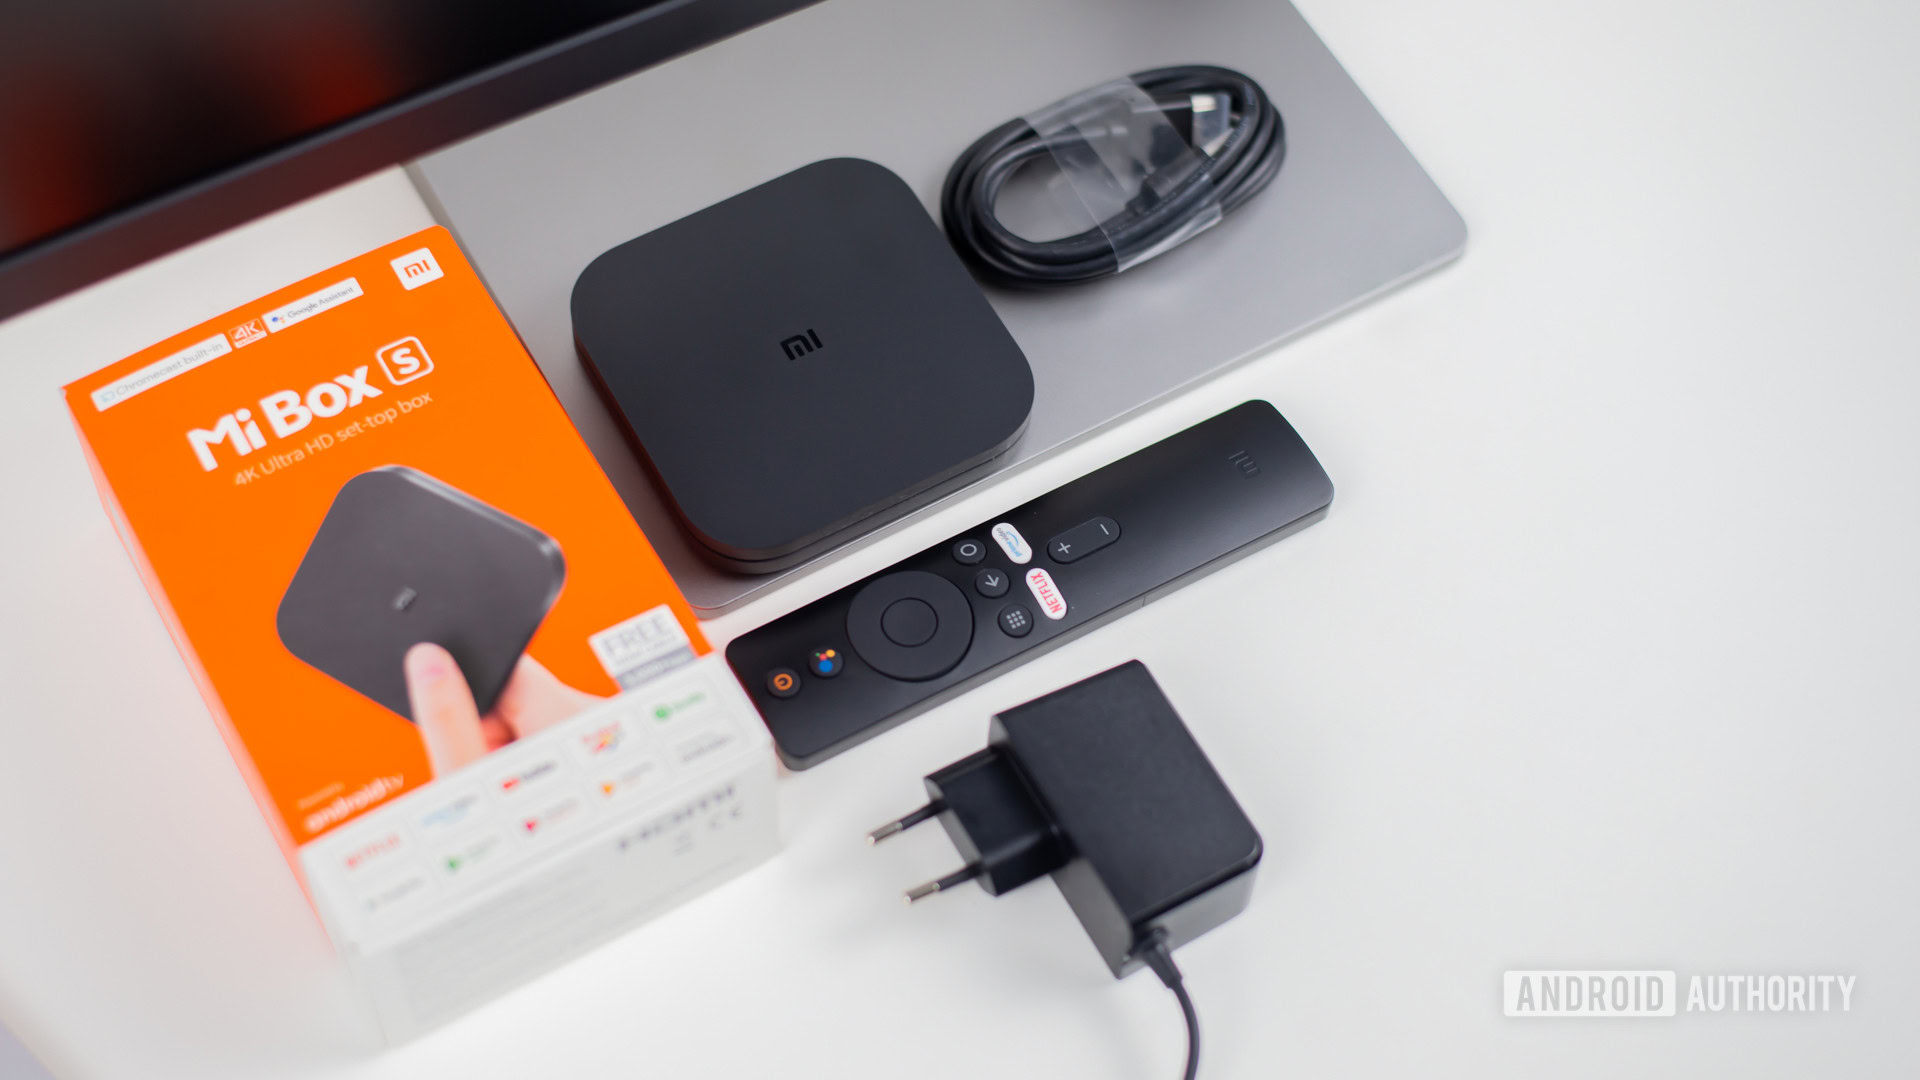 Xiaomi Mi Box 4K Review: The best 4K HDR Android TV box in a budget